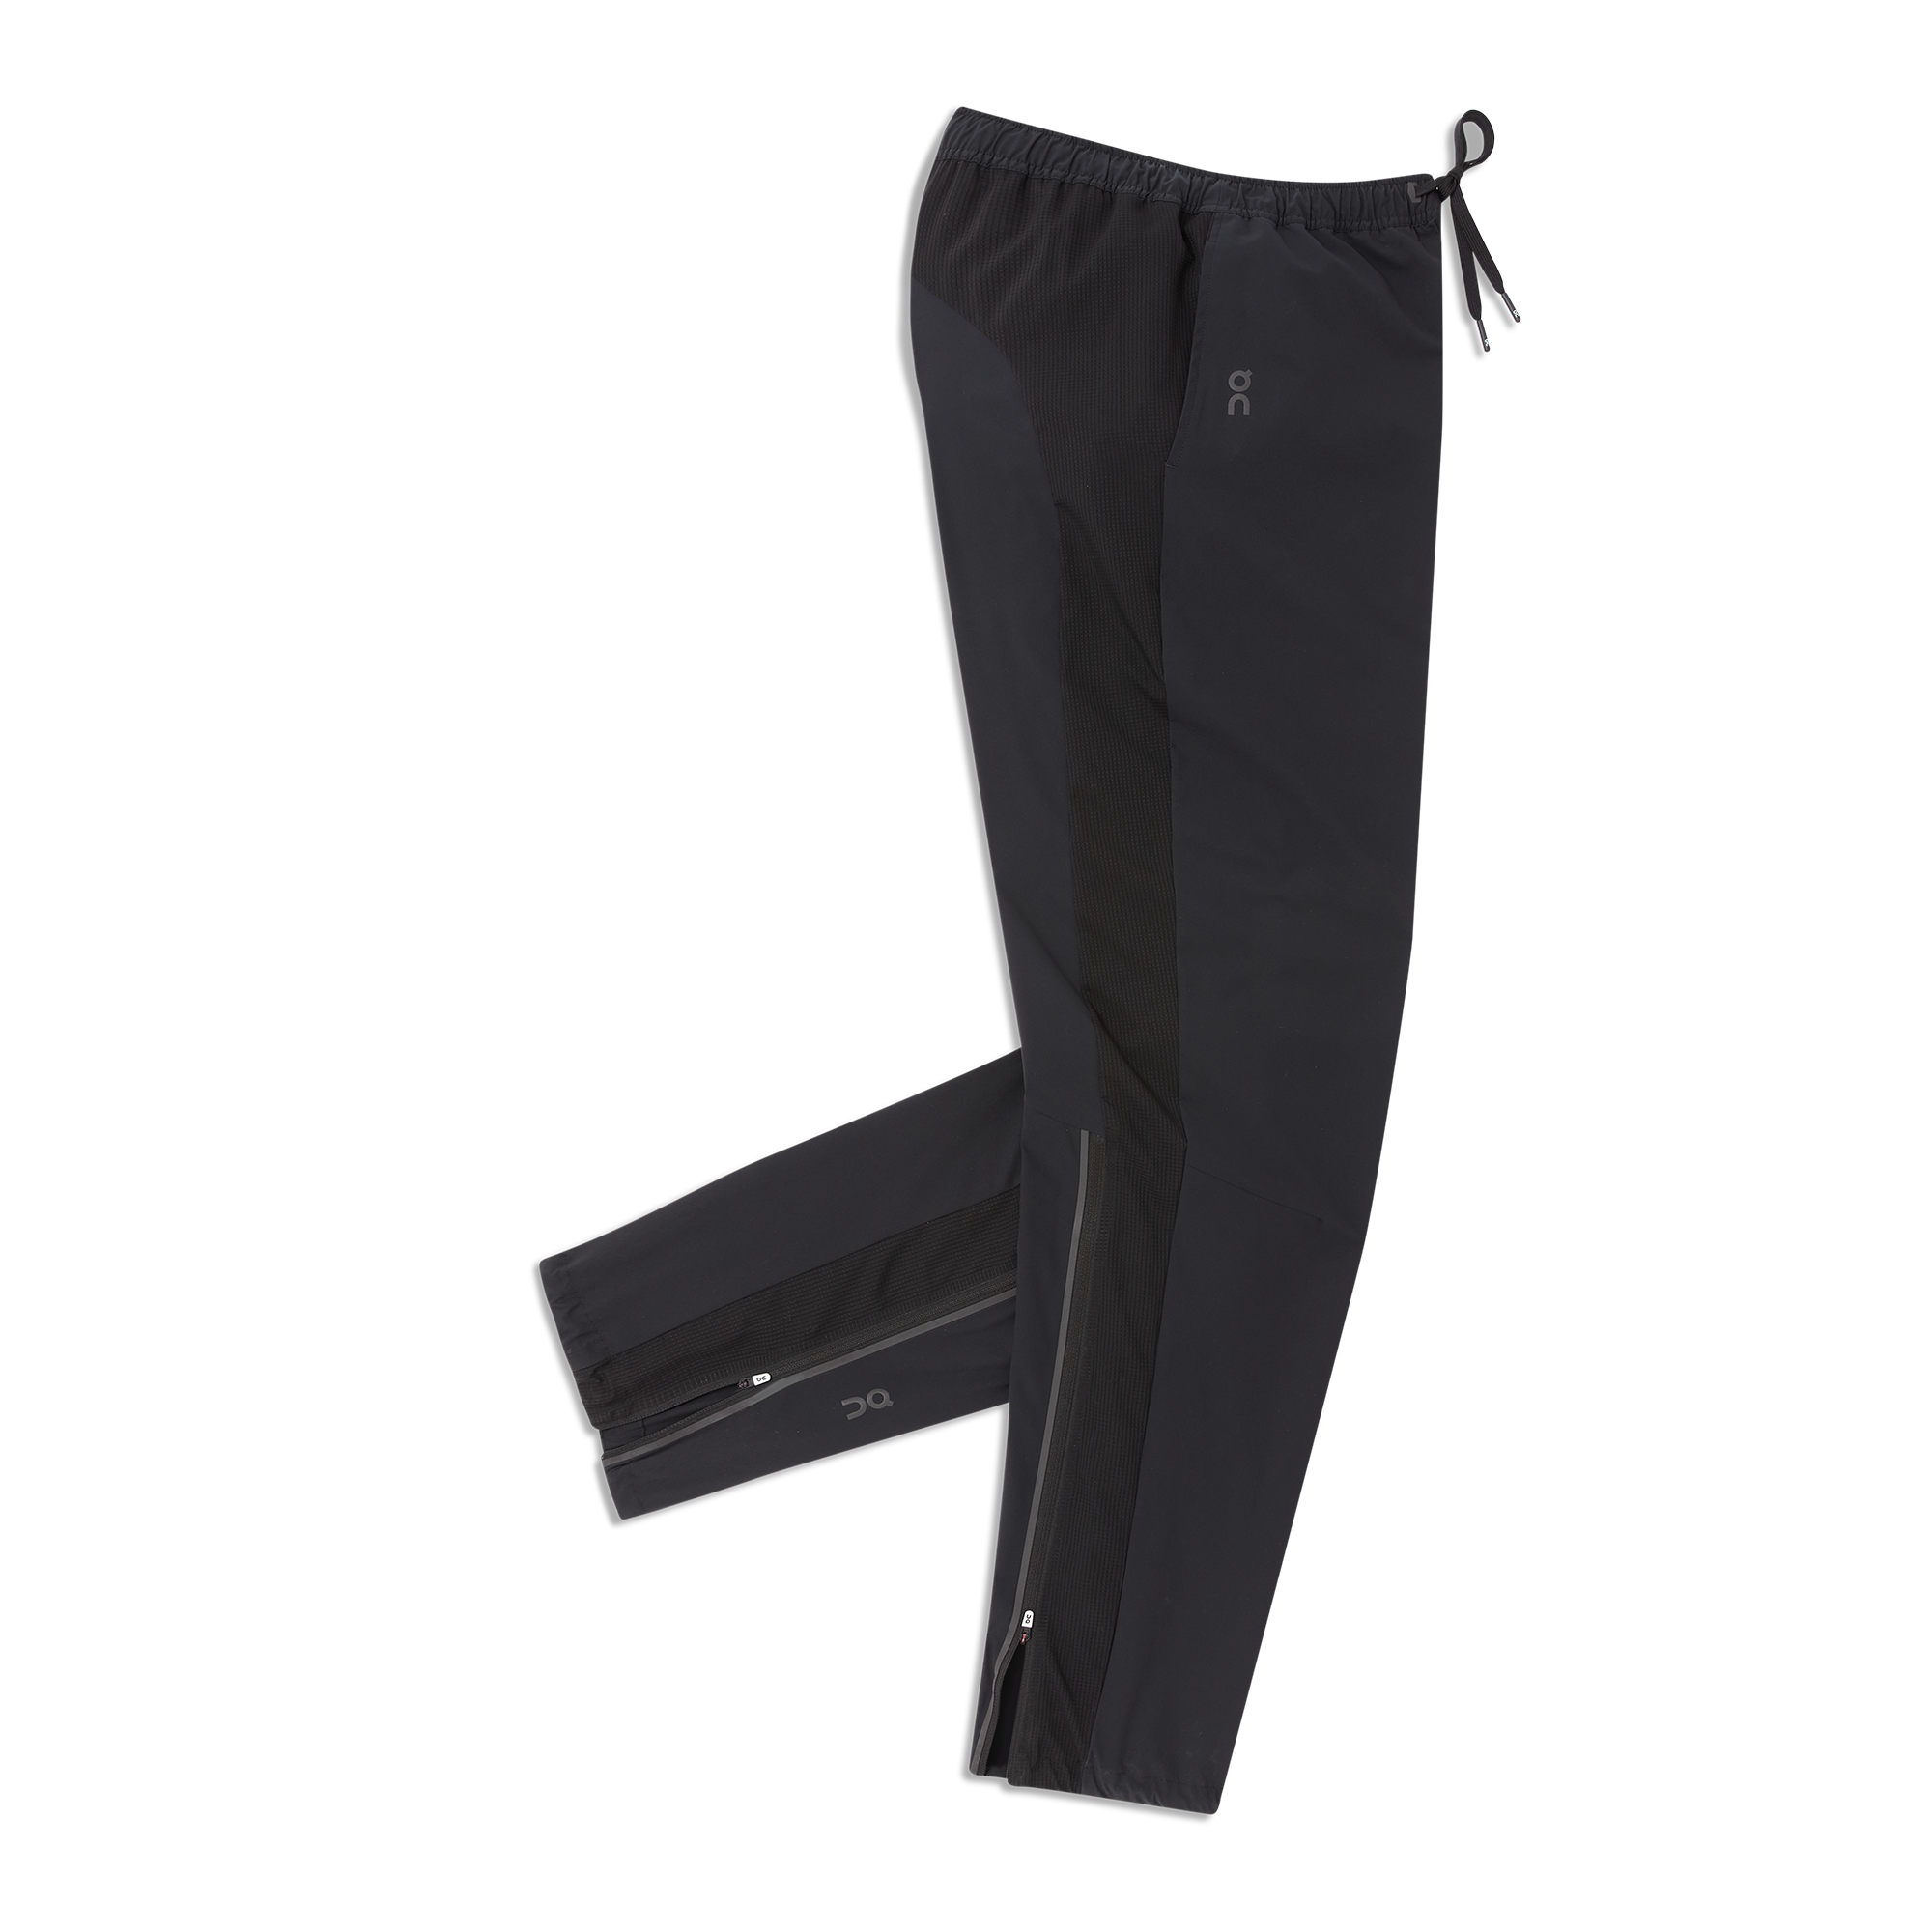 Buy Black Track Pants for Women by KICA Online